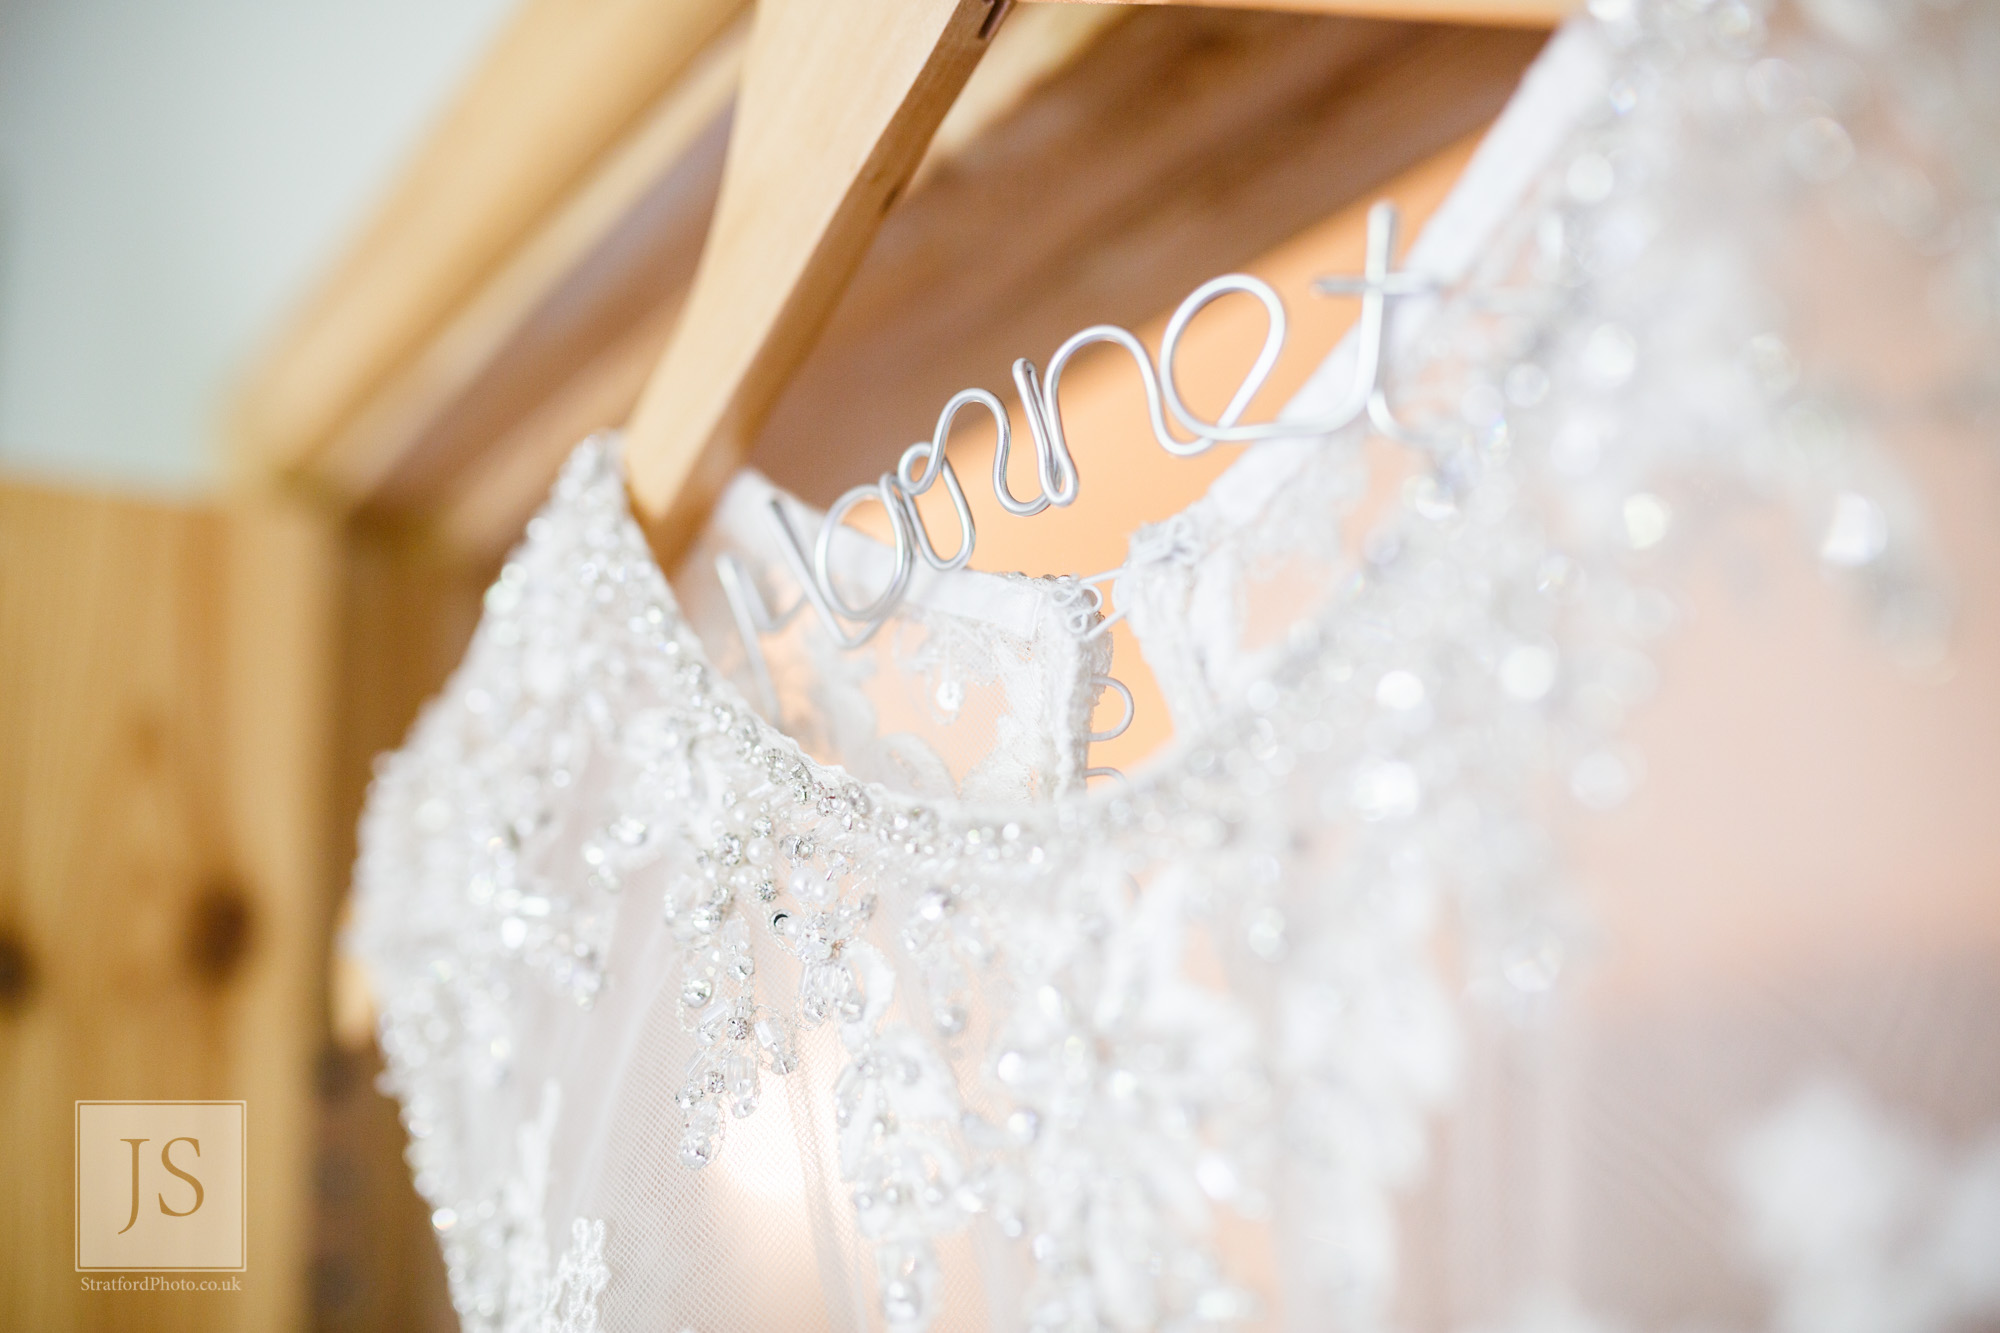 A coathanger shows the brides new name.jpg